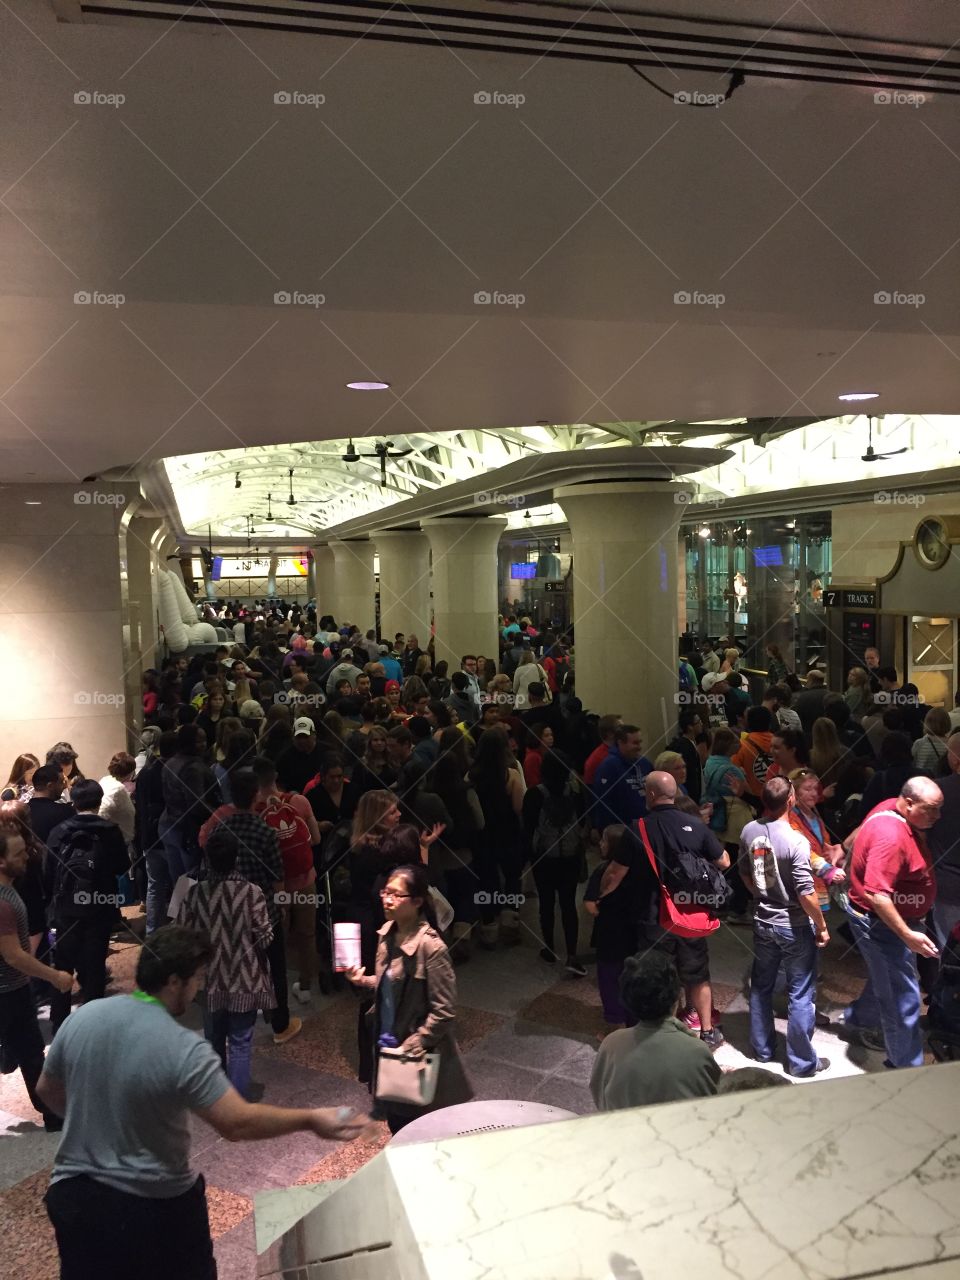 Train delays create backlog of commuters in the waiting area to board New Jersey Transit trains inside New York City train station.